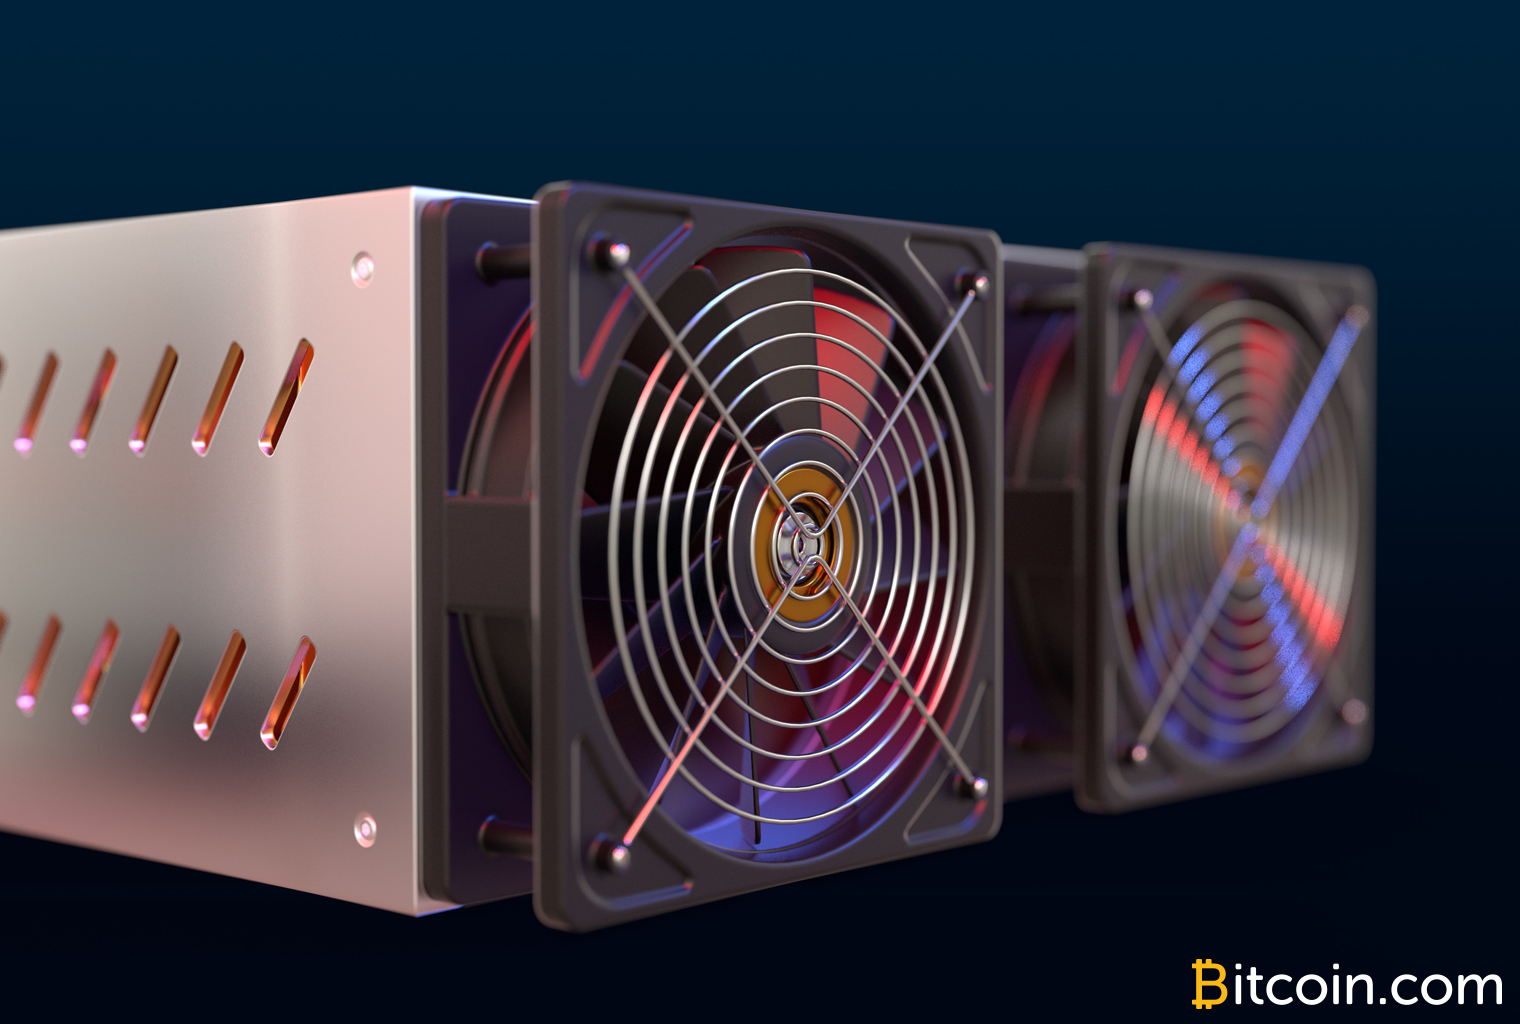 These Next Generation Mining Rigs Pack A Ton Of Hashpower Bitcoin News - 